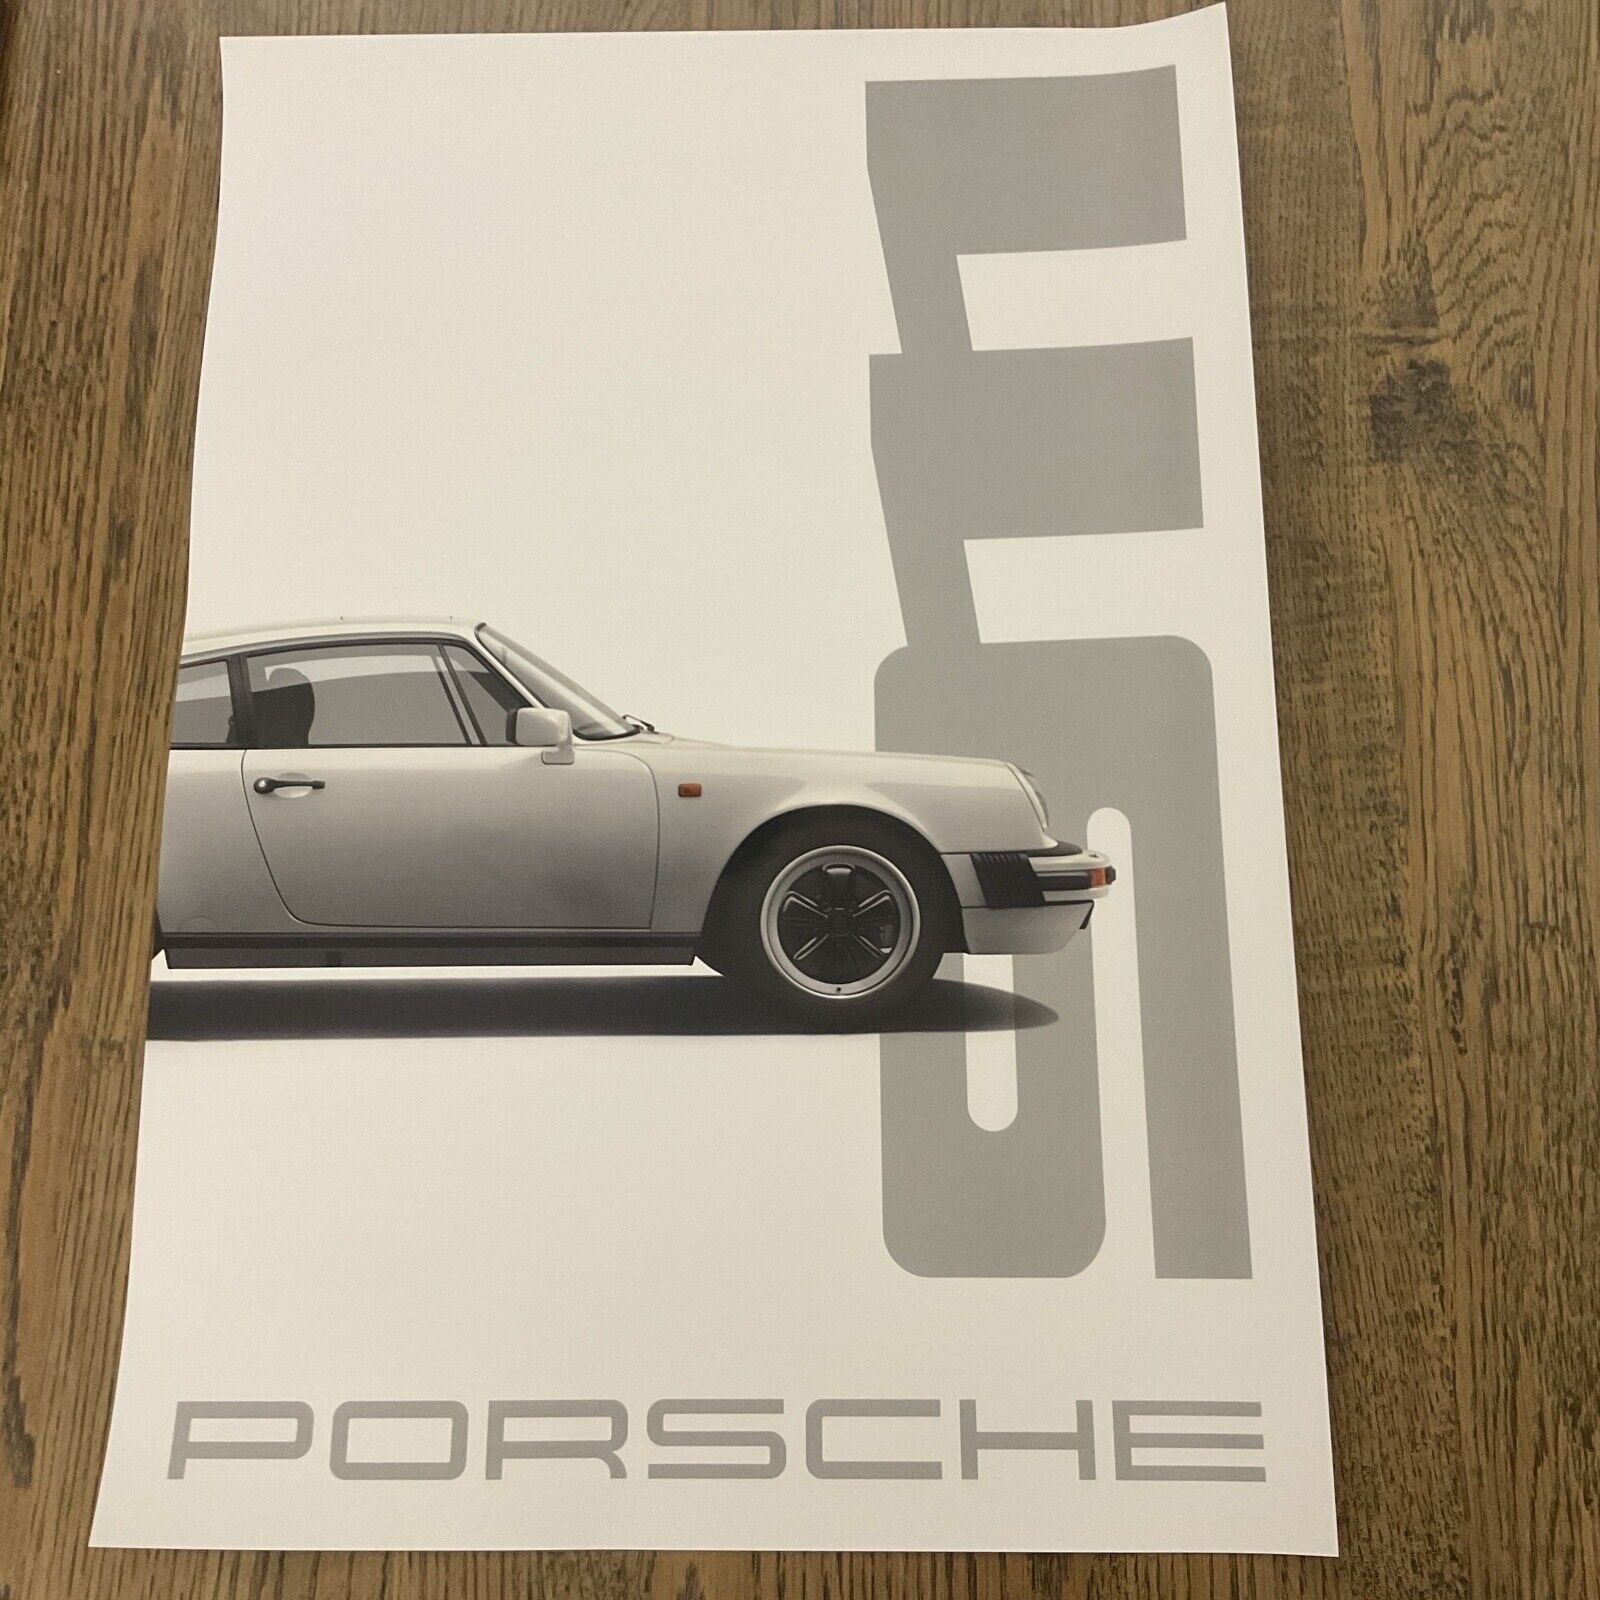 2023 PORSCHE 911 60 YEARS G SERIES CARRERA 1989 LIMITED EDITION SHOWROOM POSTER